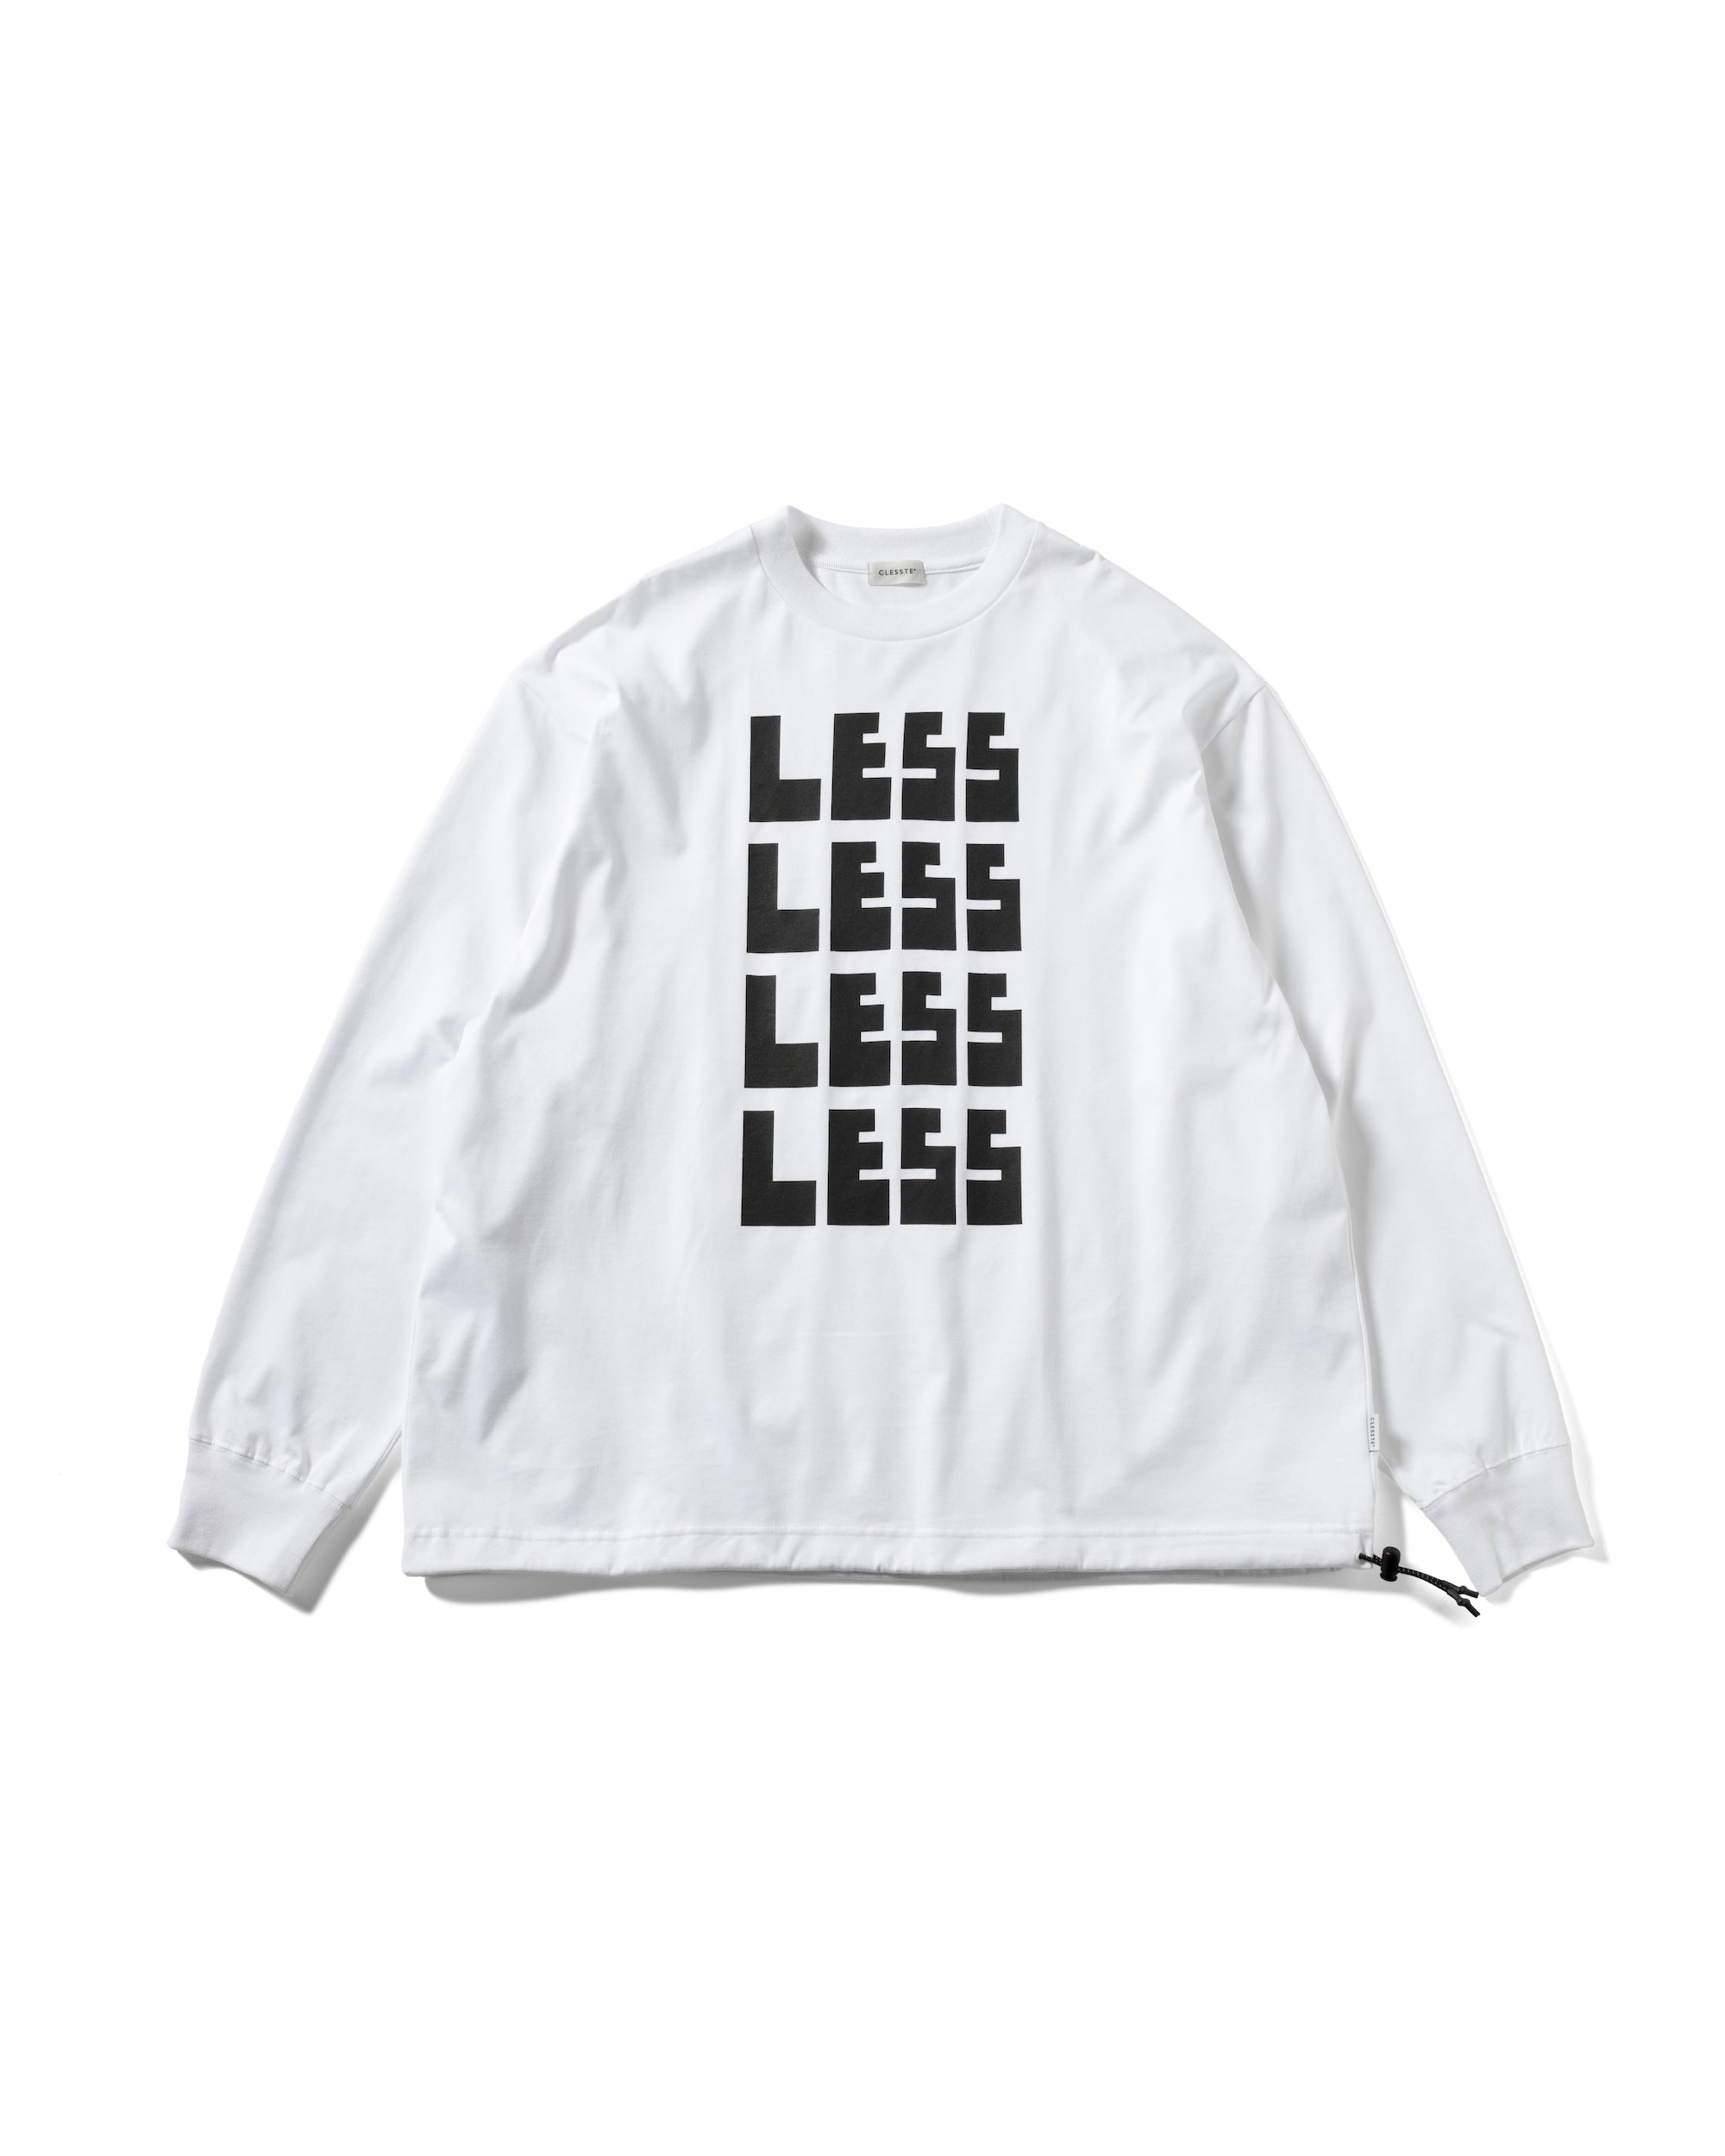 【4.17 WED 20:00- IN STOCK】"LESS" MASSIVE L/S T-SHIRT WITH DRAWSTRINGS